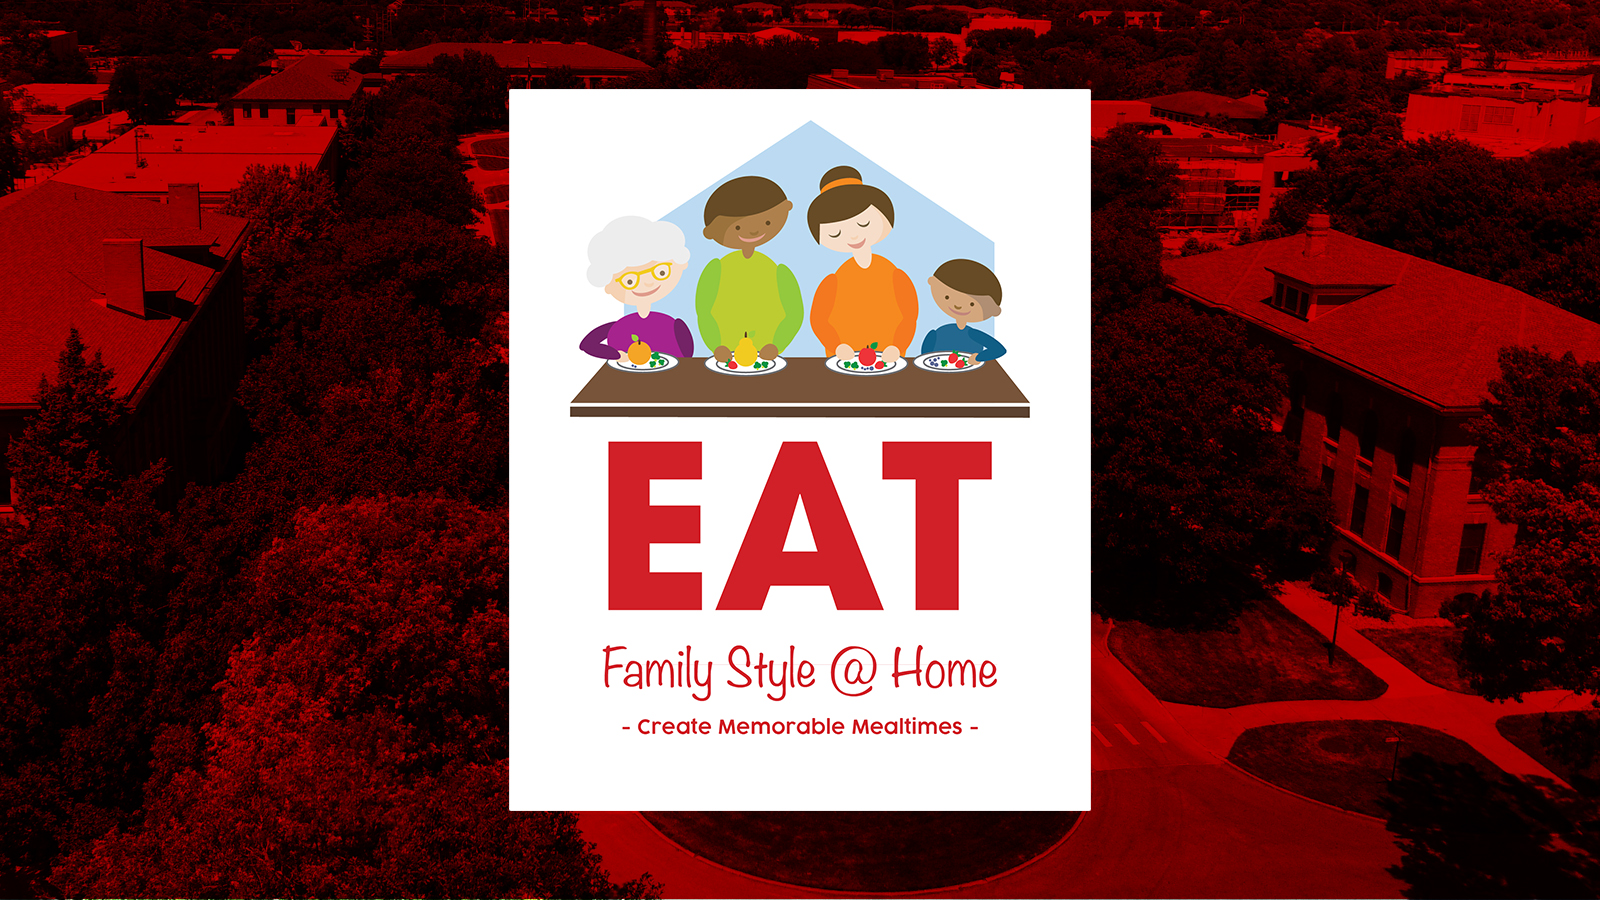 New, easy tool for families: EAT Family Style at Home | IANR News